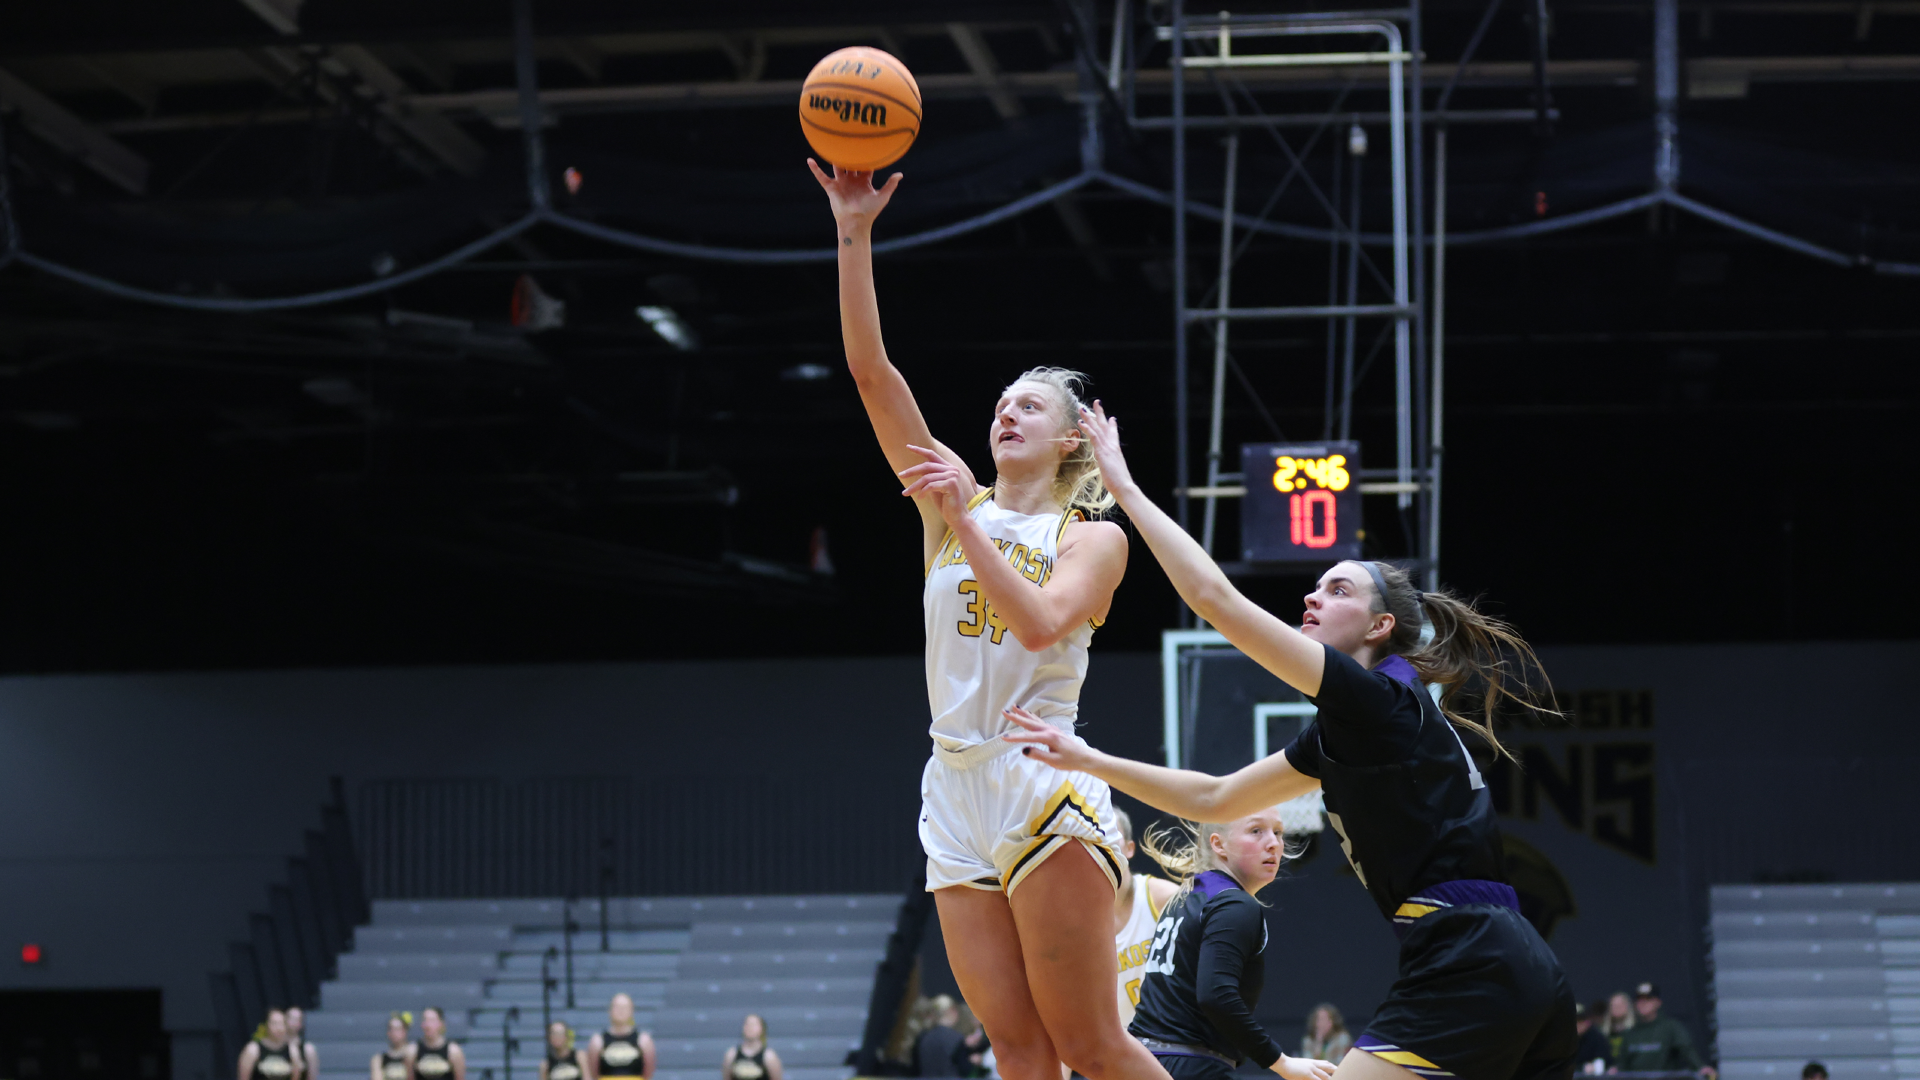 Kayce Vaile recorded her third double-double of the season (24 points, 12 rebounds) in the Titans' 67-37 win over the Pointers on Saturday afternoon